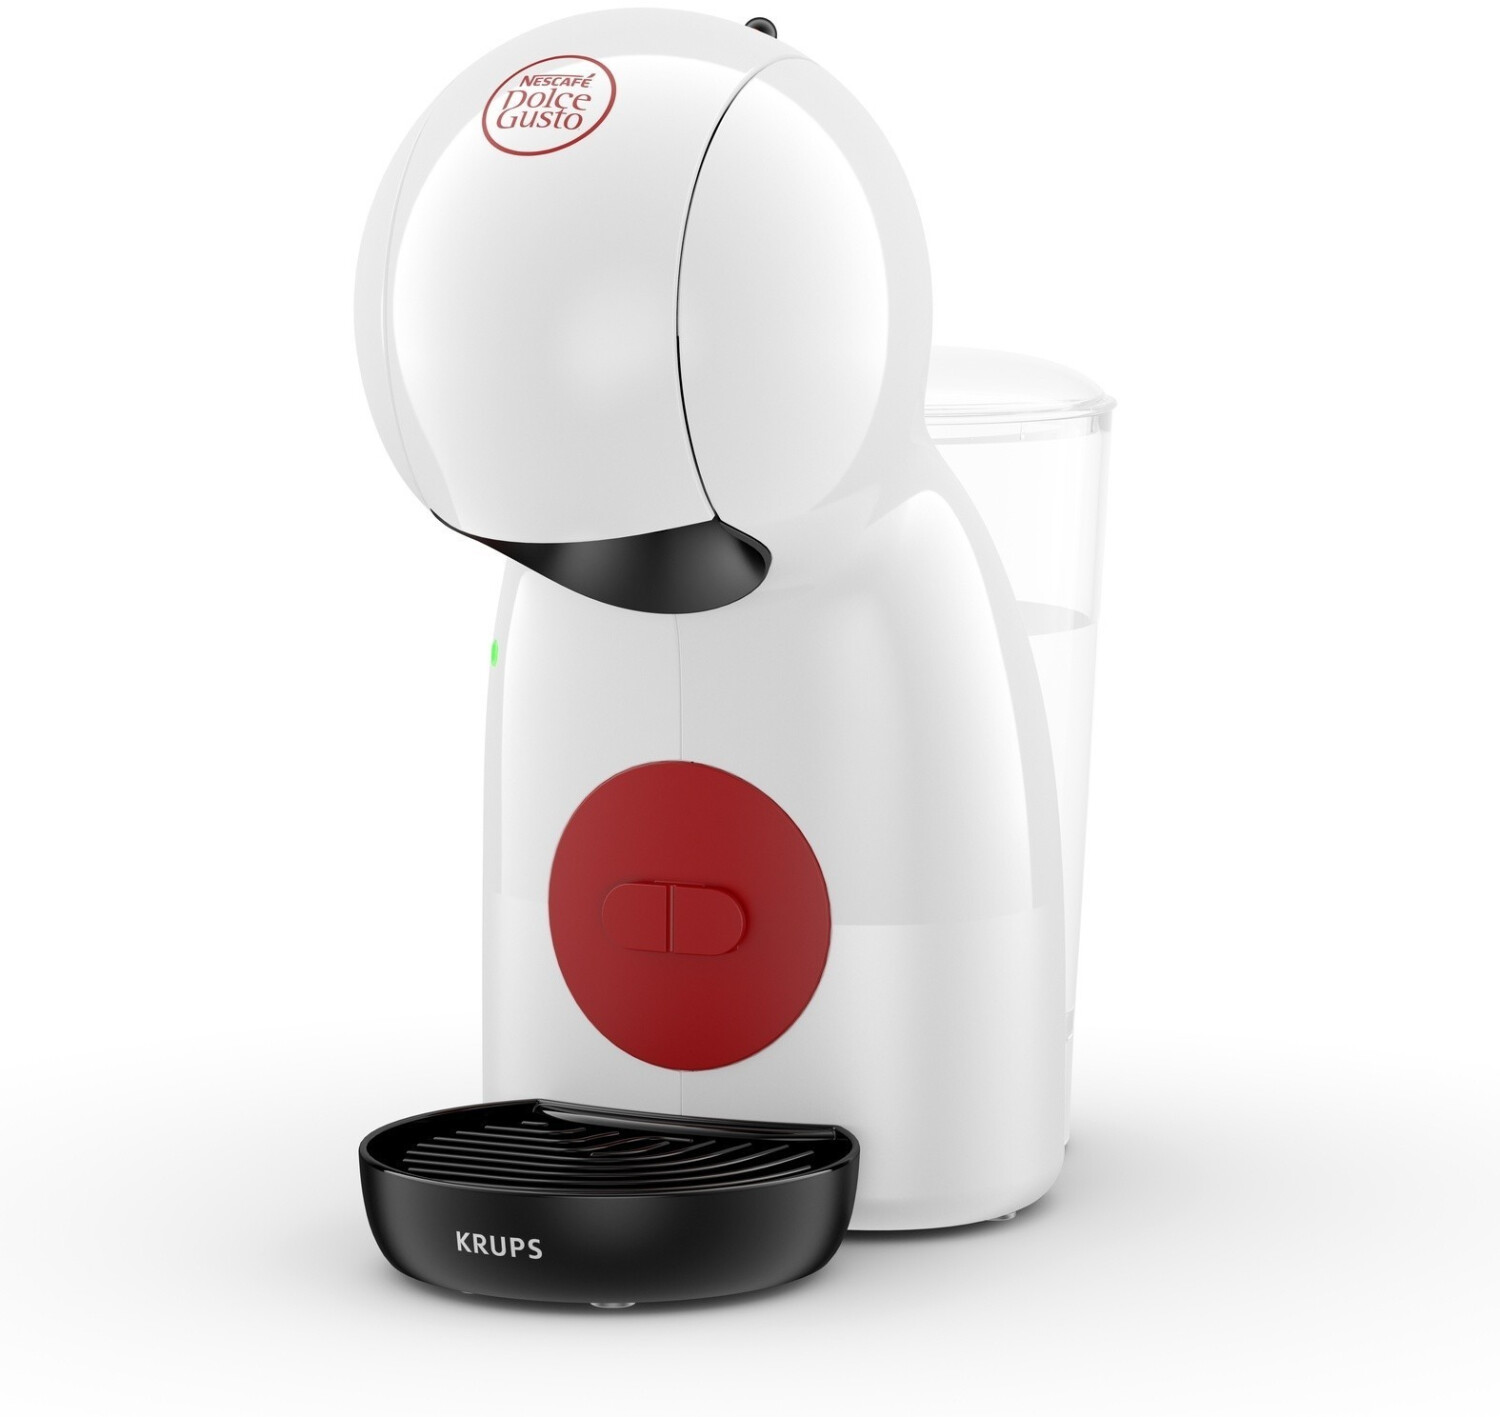 Nescafe Dolce Gusto Piccolo Krups Rouge